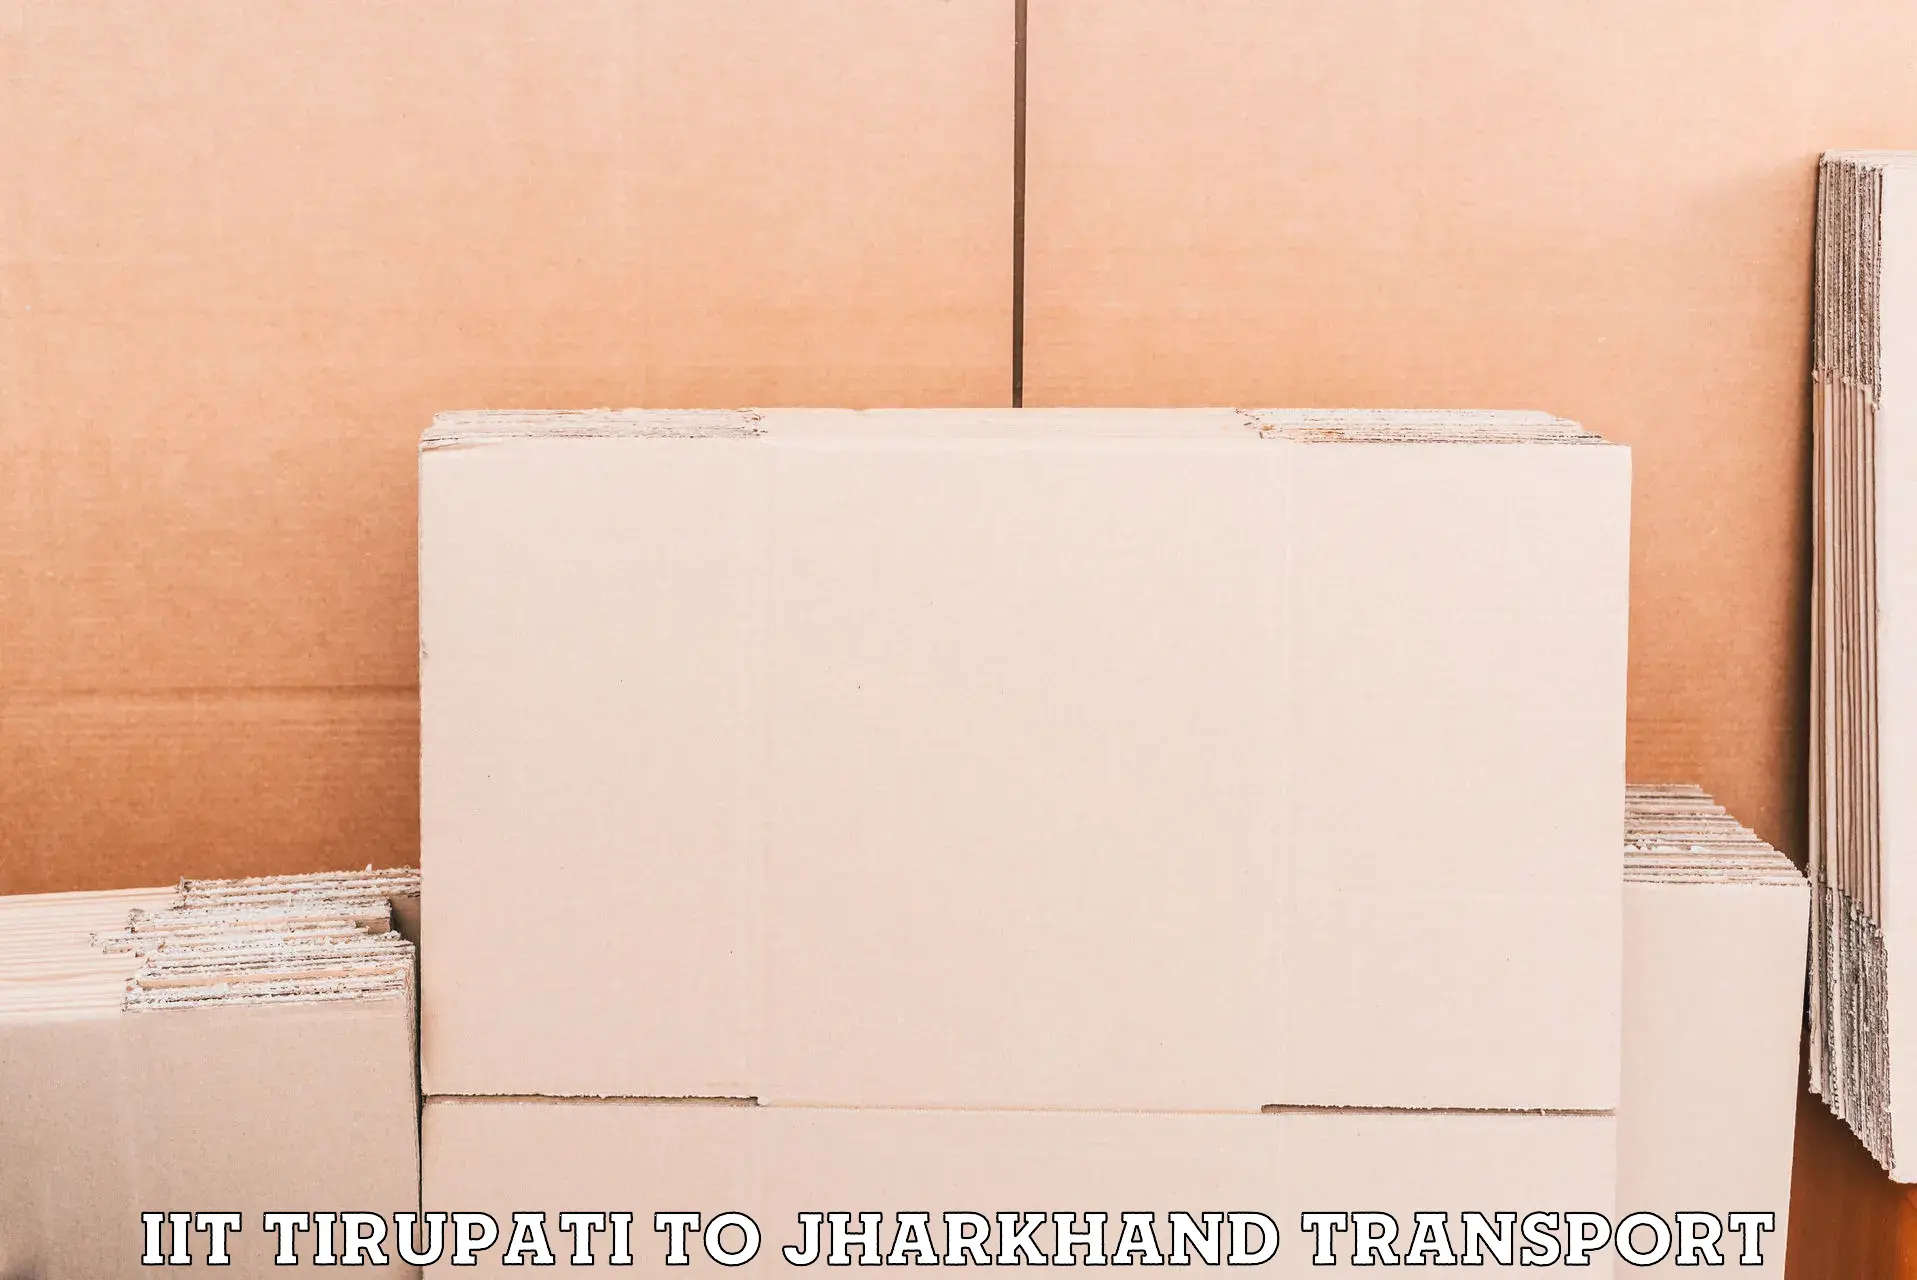 Commercial transport service IIT Tirupati to Dhanbad